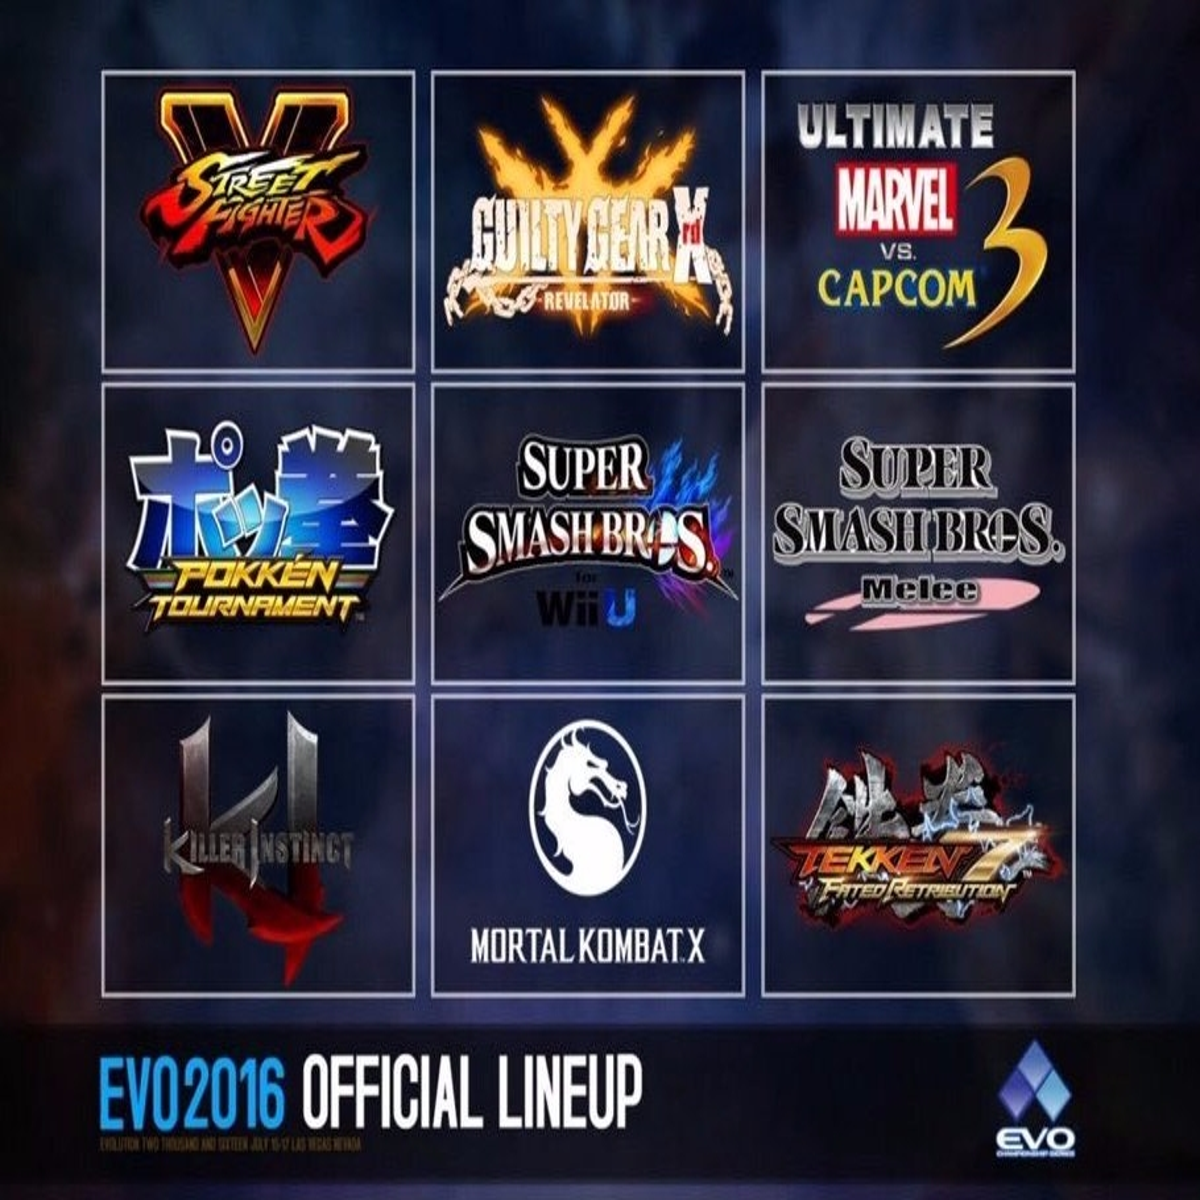 World's largest fighting game tournament, Evo 2014, begins today